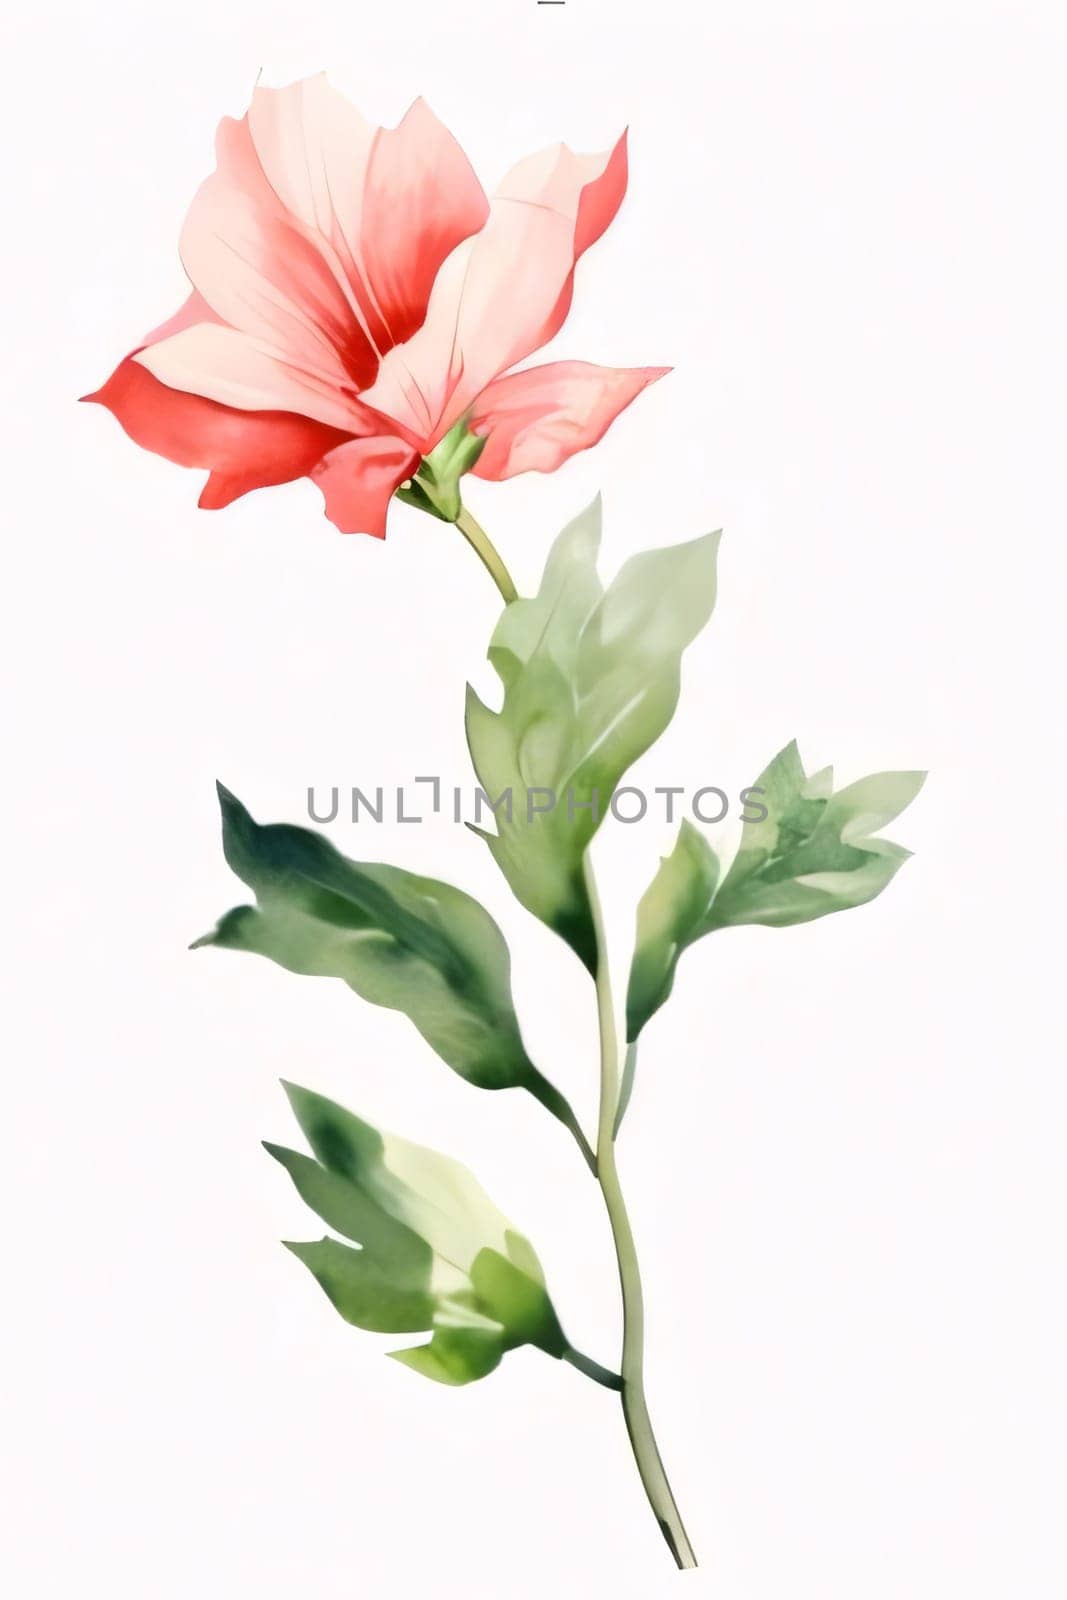 Drawn, painted pink rose flower on isolated white background. Flowering flowers, a symbol of spring, new life. by ThemesS